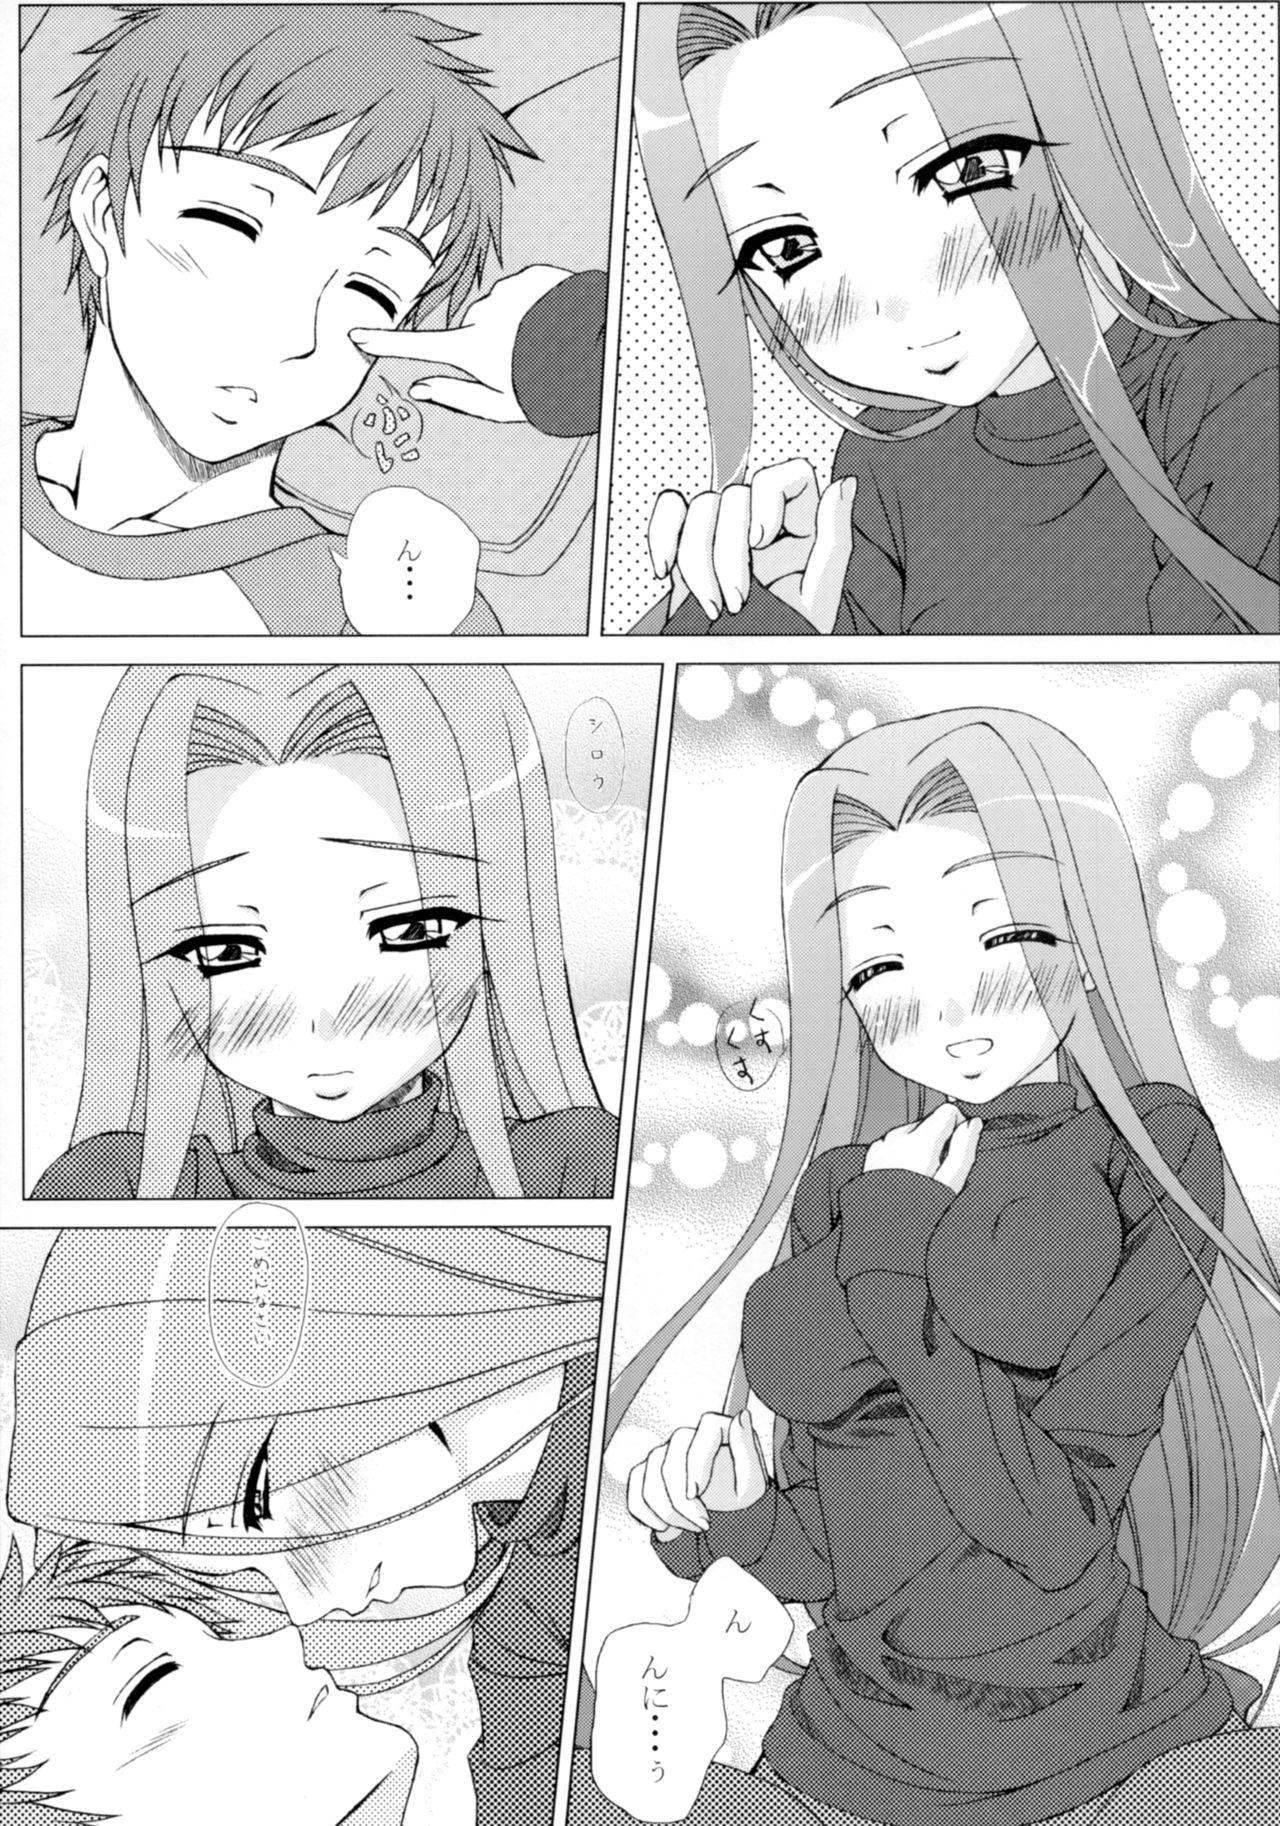 Canadian CUTE - Fate stay night Gorgeous - Page 4